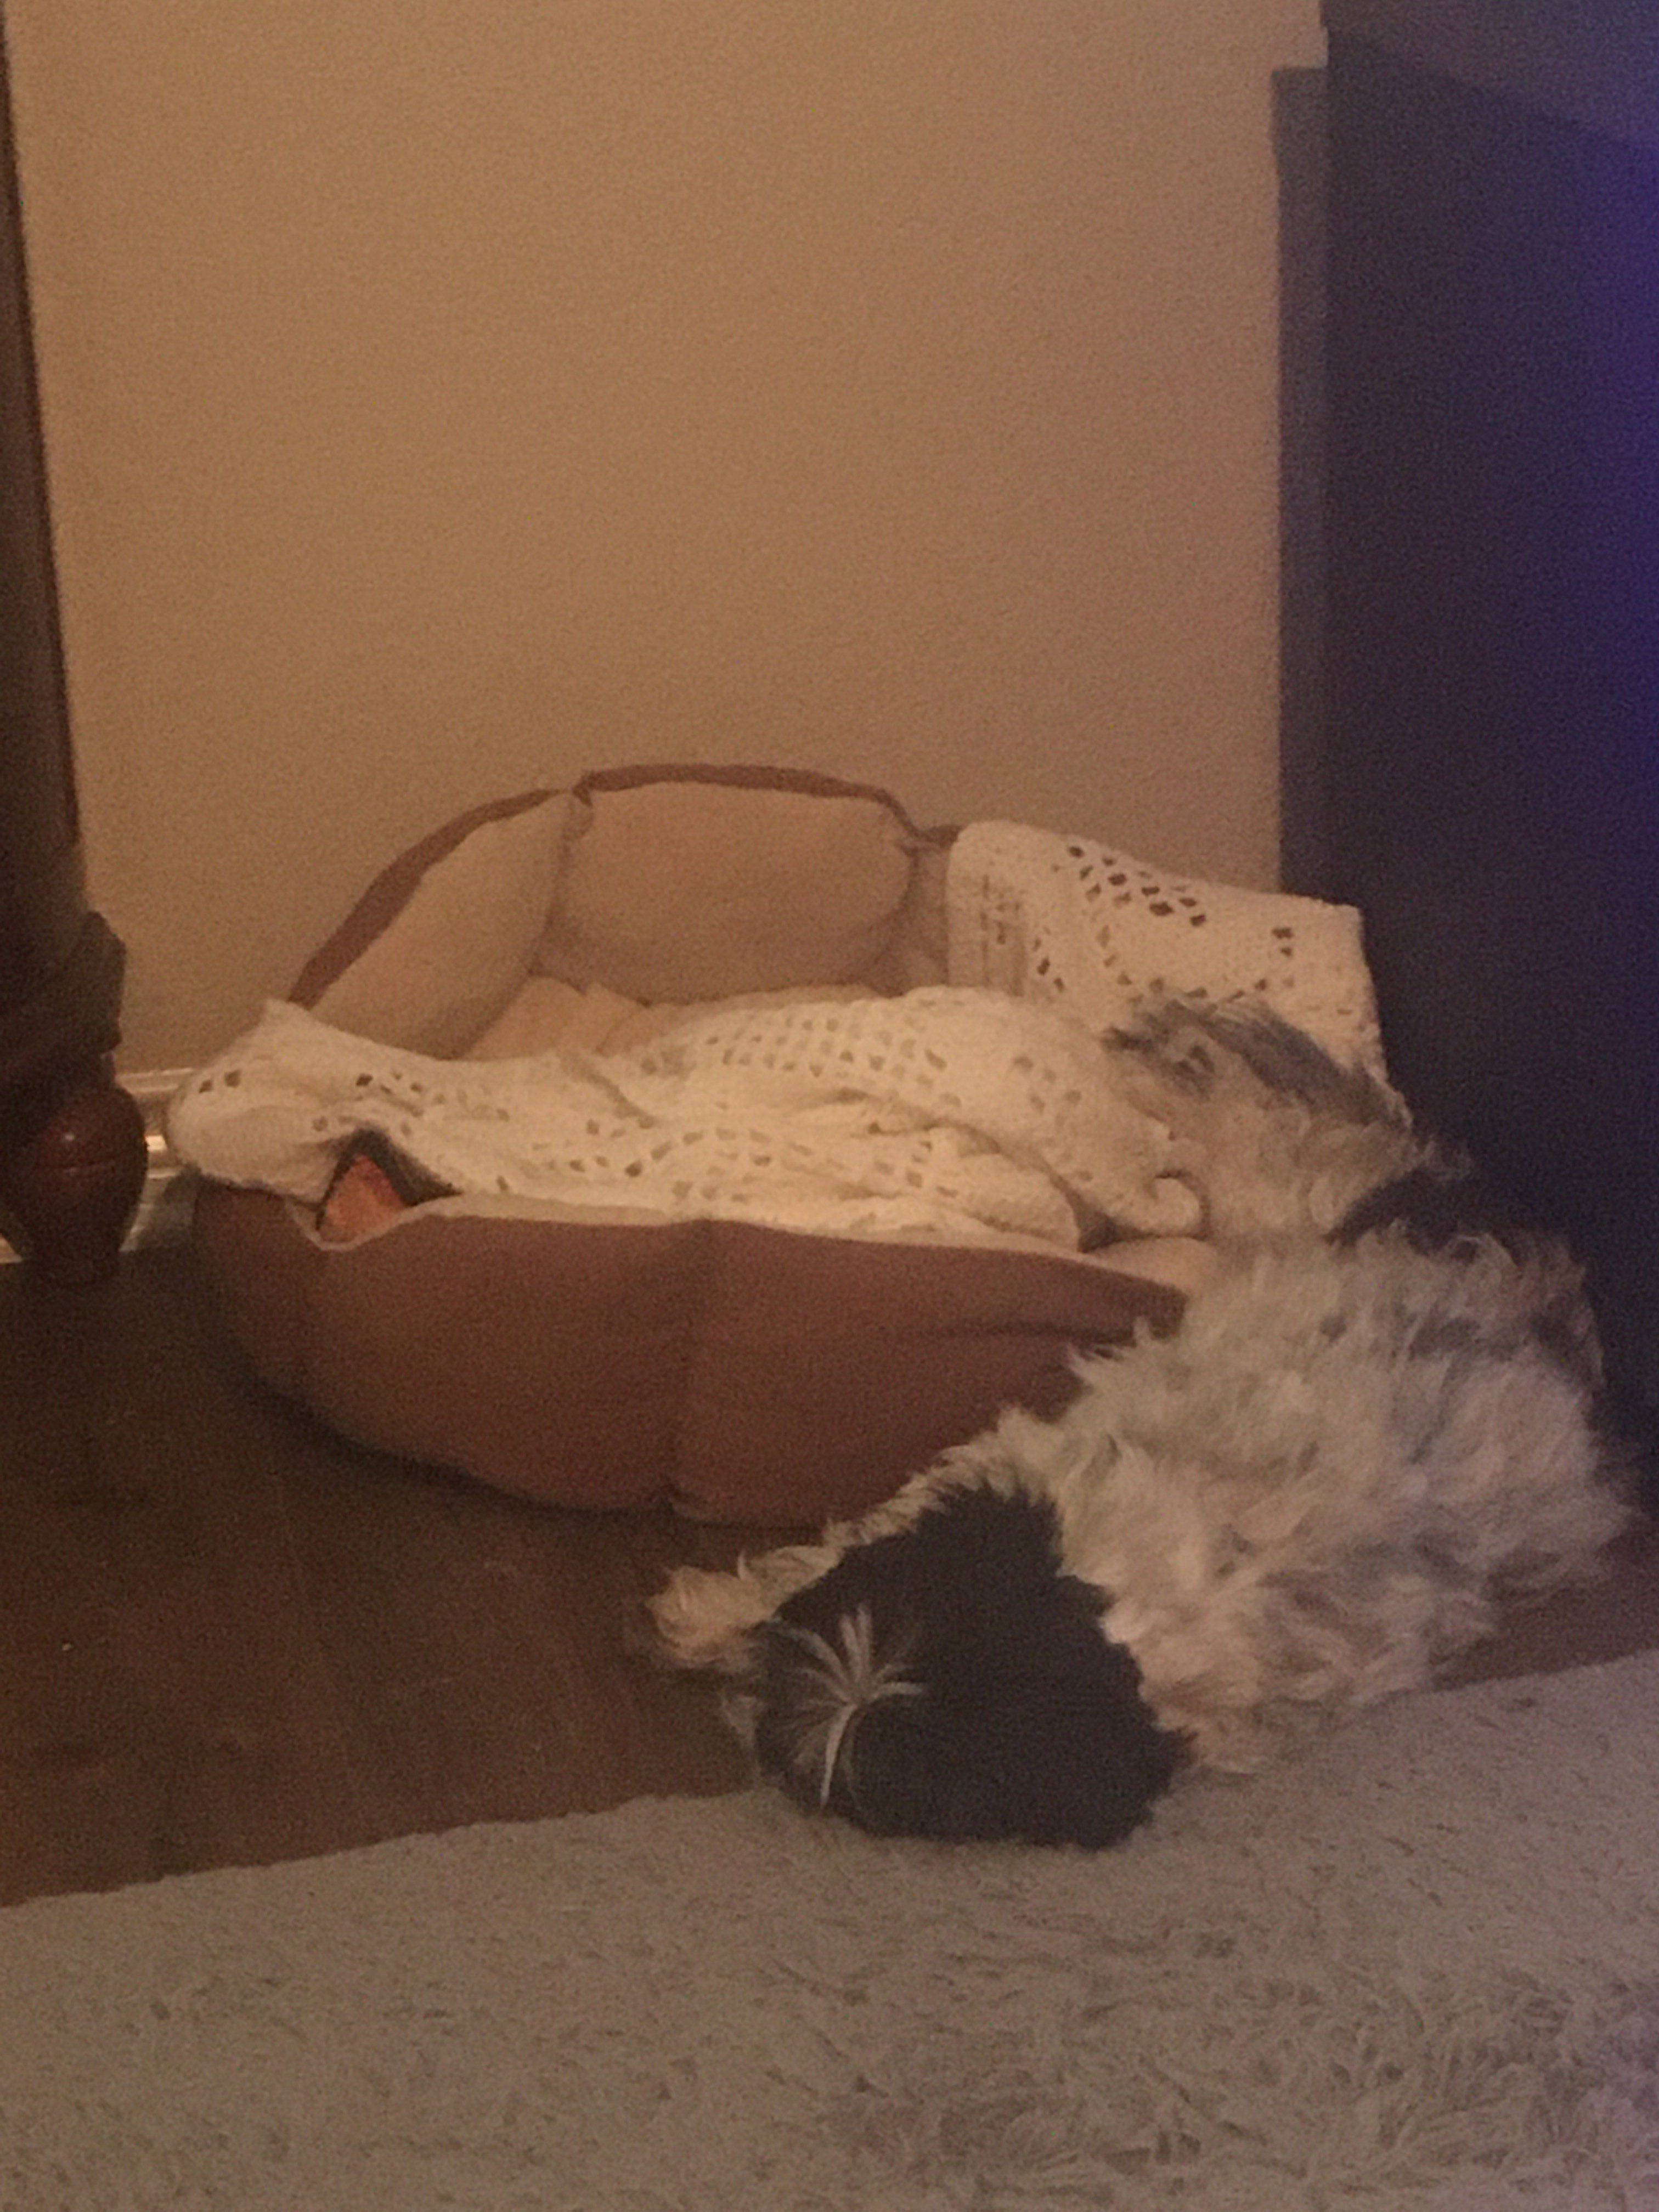 the same dog in the same location moments later, laying down outside of her bed